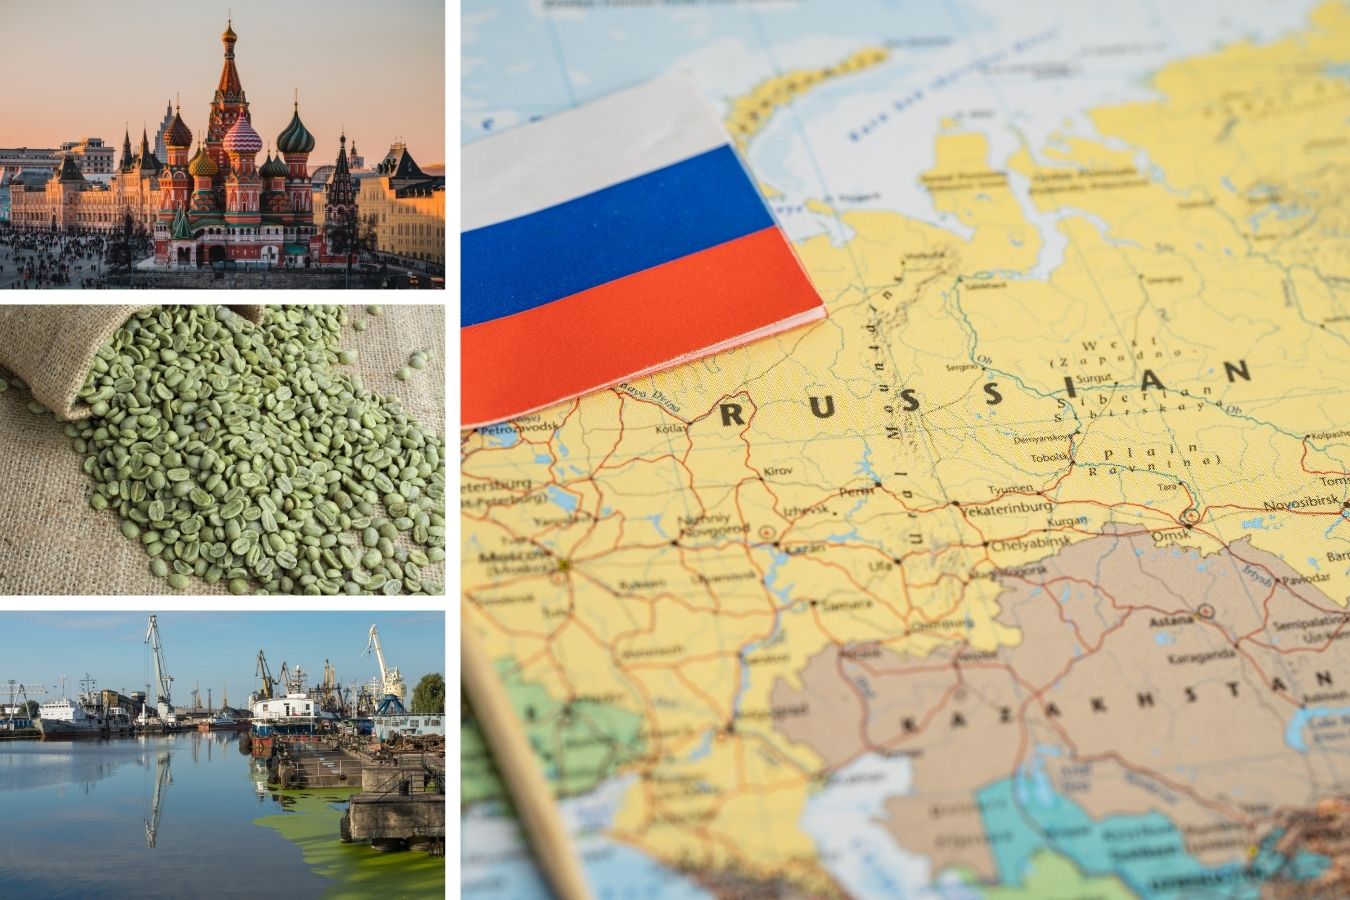 How To Export and Import Coffee To Russia? - Shipping and exporting sea freight from Vietnam to Russia